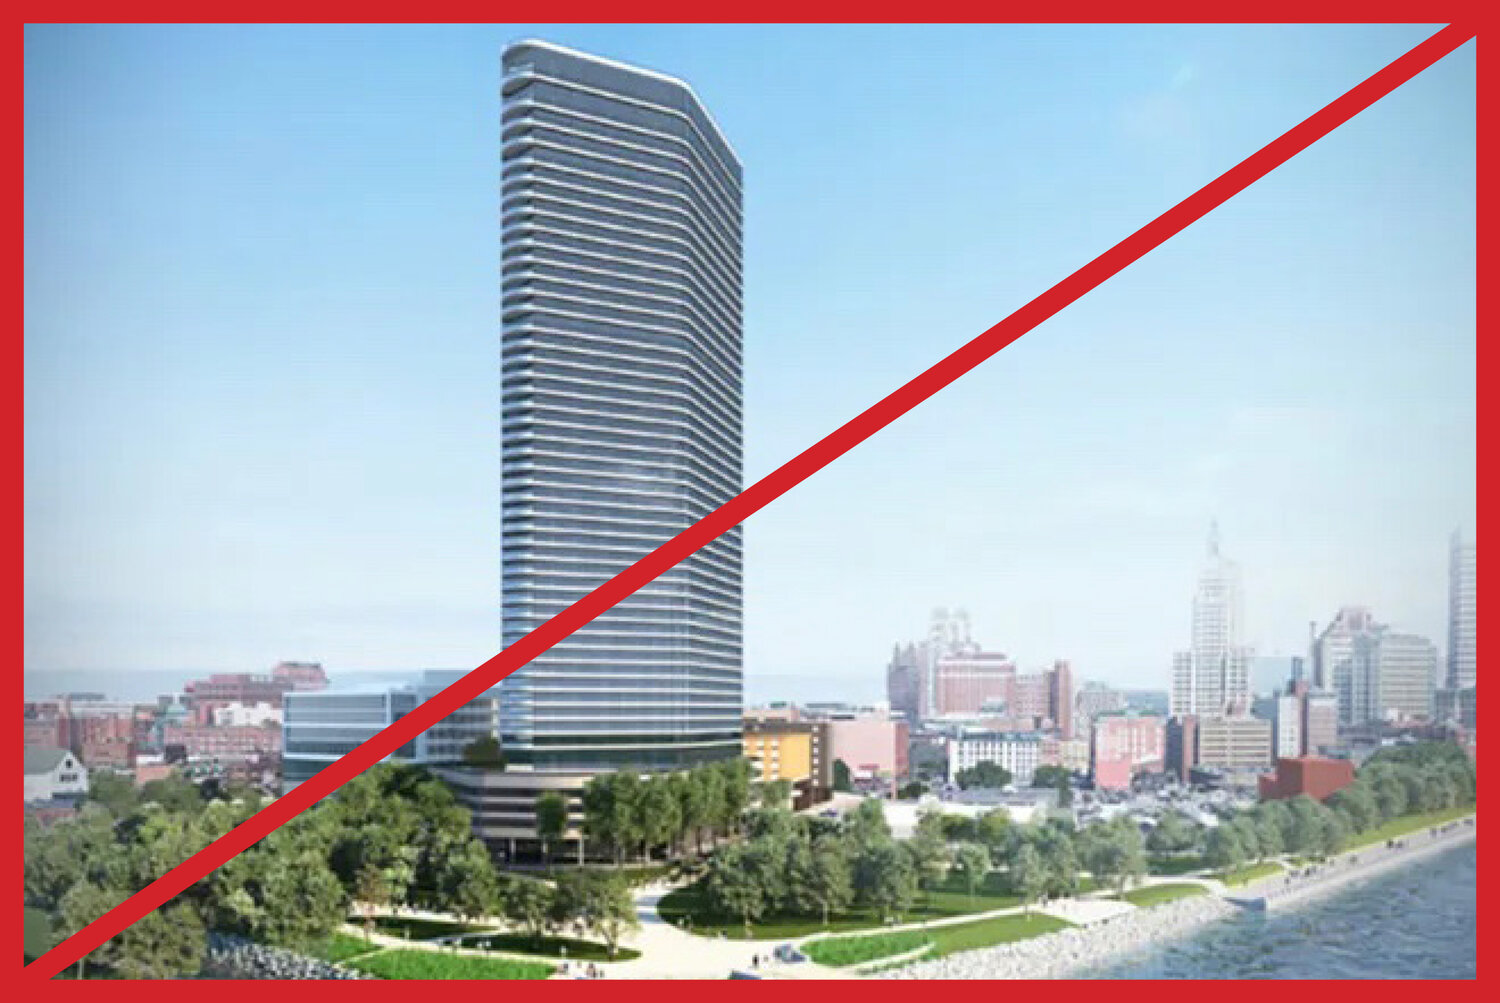 The proposed Fane Tower project is dead